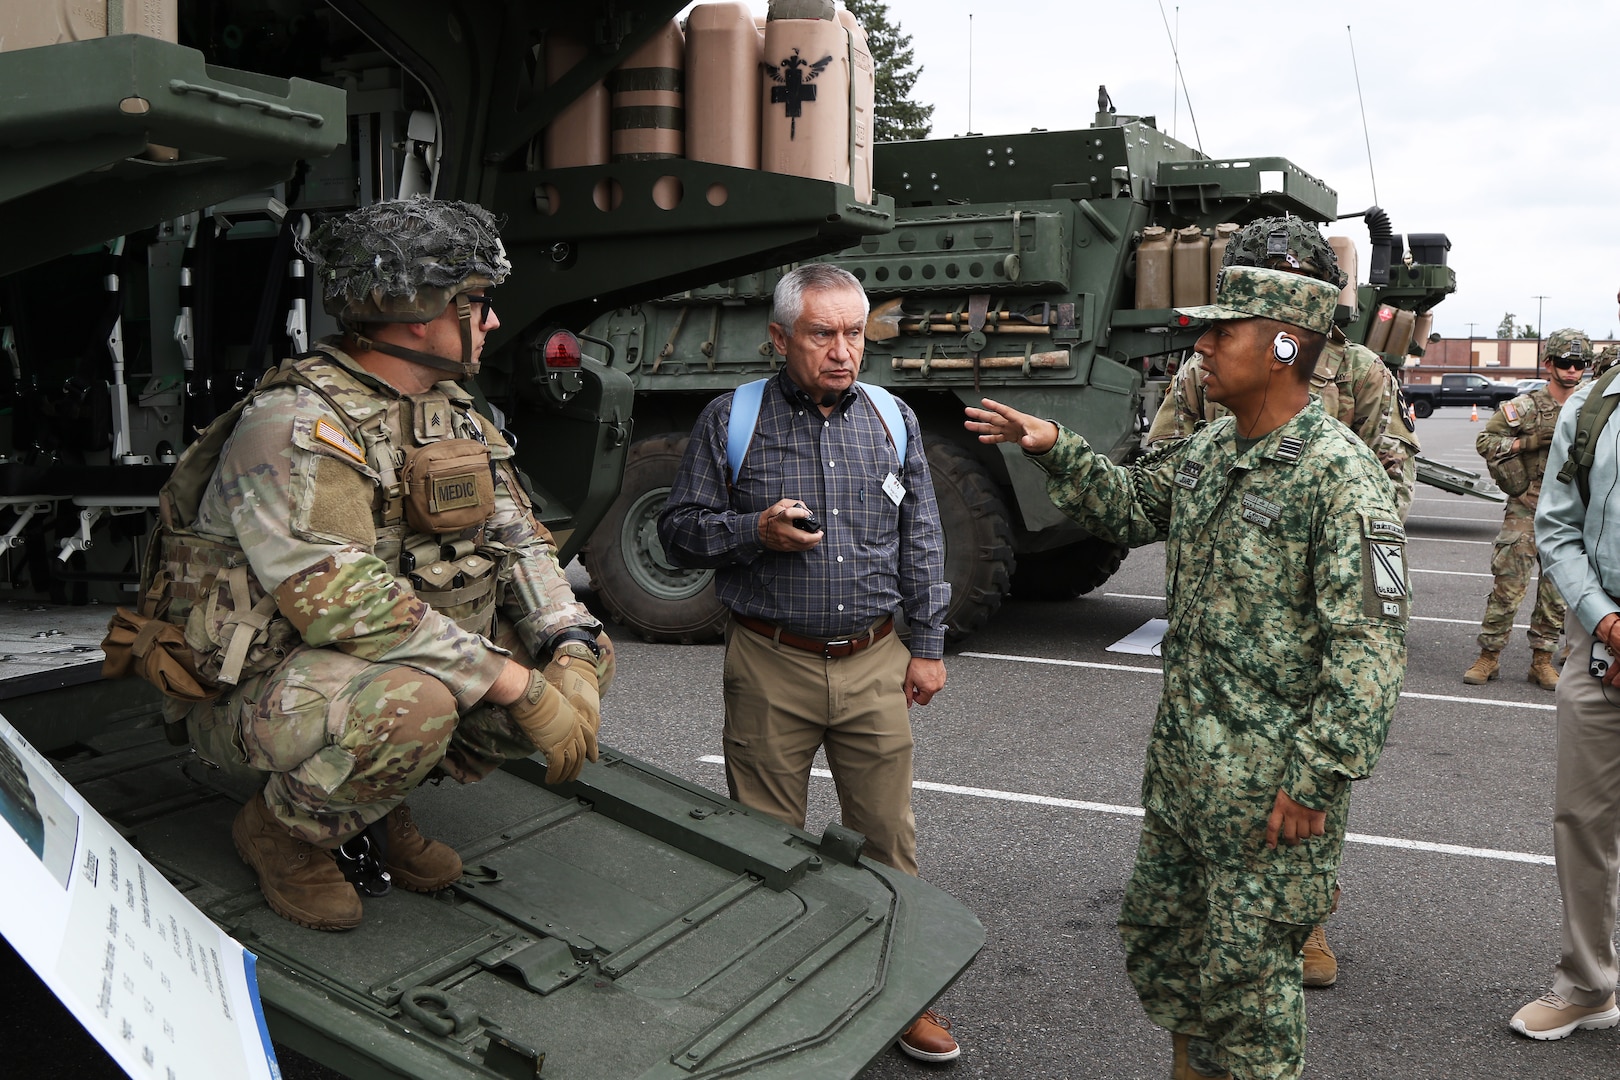 U.S. Army North (ARNORTH) and the Mexican Army participated in FIARP